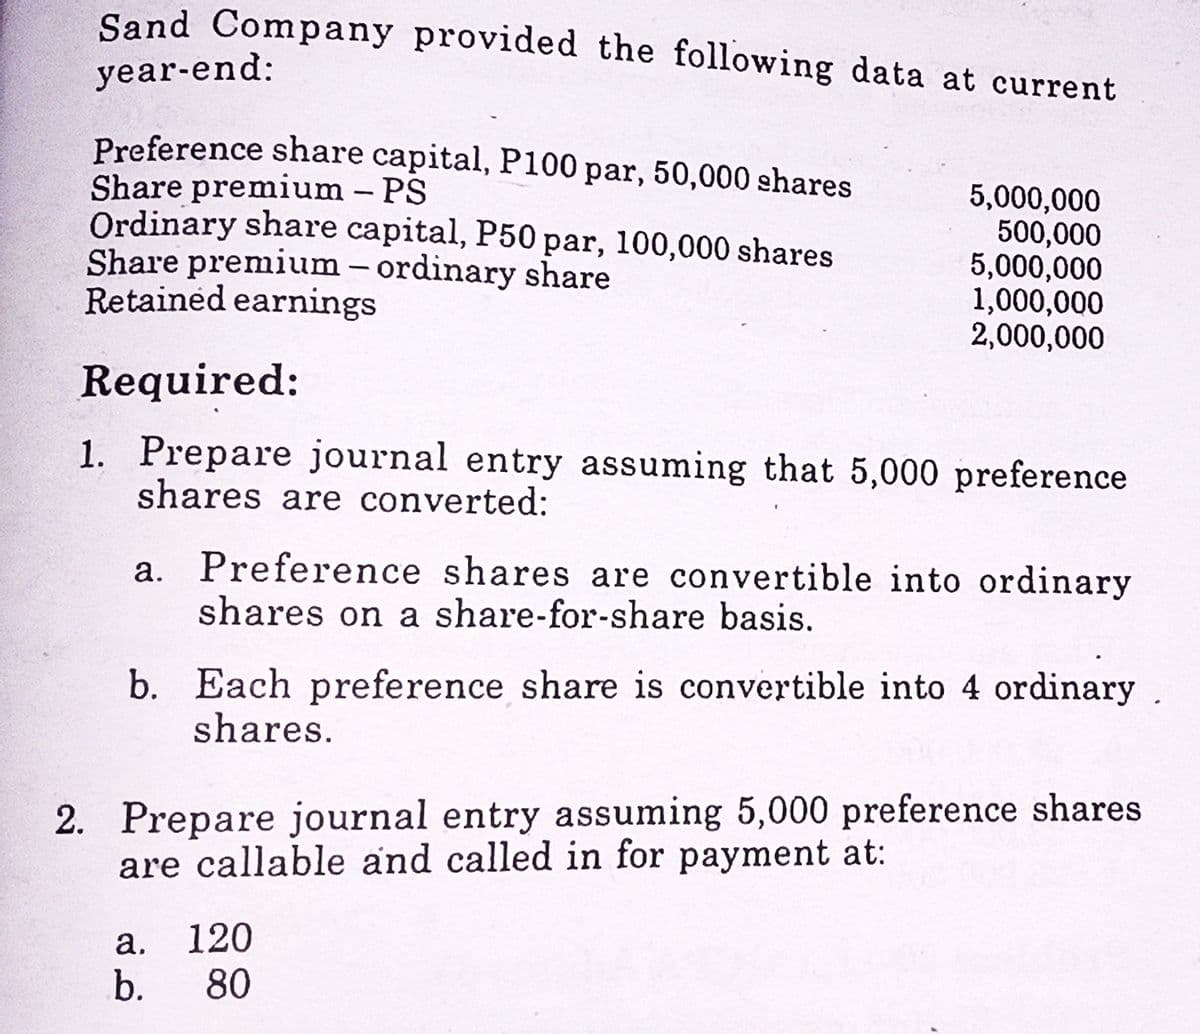 Sand Company provided the following data at current
year-end:
Preference share capital, P100 par, 50,000 shares
Share premium – PS
Ordinary share capital, P50 par, 100,000 shares
Share premium – ordinary share
Retained earnings
5,000,000
500,000
5,000,000
1,000,000
2,000,000
Required:
1. Prepare journal entry assuming that 5,000 preference
shares are converted:
Preference shares are convertible into ordinary
shares on a share-for-share basis.
а.
b. Each preference share is convertible into 4 ordinary
shares.
2. Prepare journal entry assuming 5,000 preference shares
are callable and called in for payment at:
а.
120
b.
80
